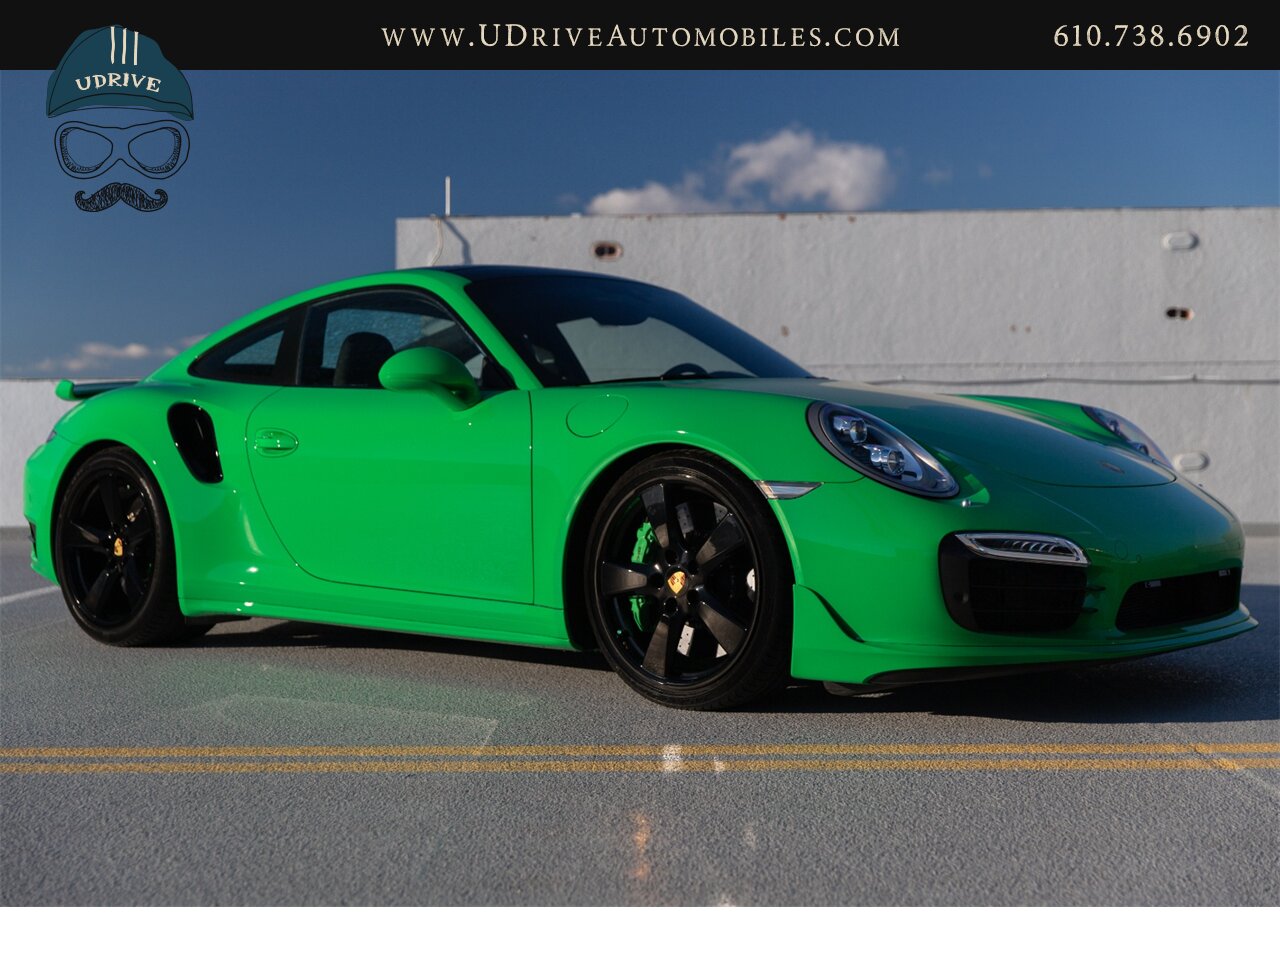 2016 Porsche 911 Turbo S PTS Viper Green Aerokit $203k MSRP  Painted Side Skirts Painted Grilles Wheels in Black - Photo 13 - West Chester, PA 19382